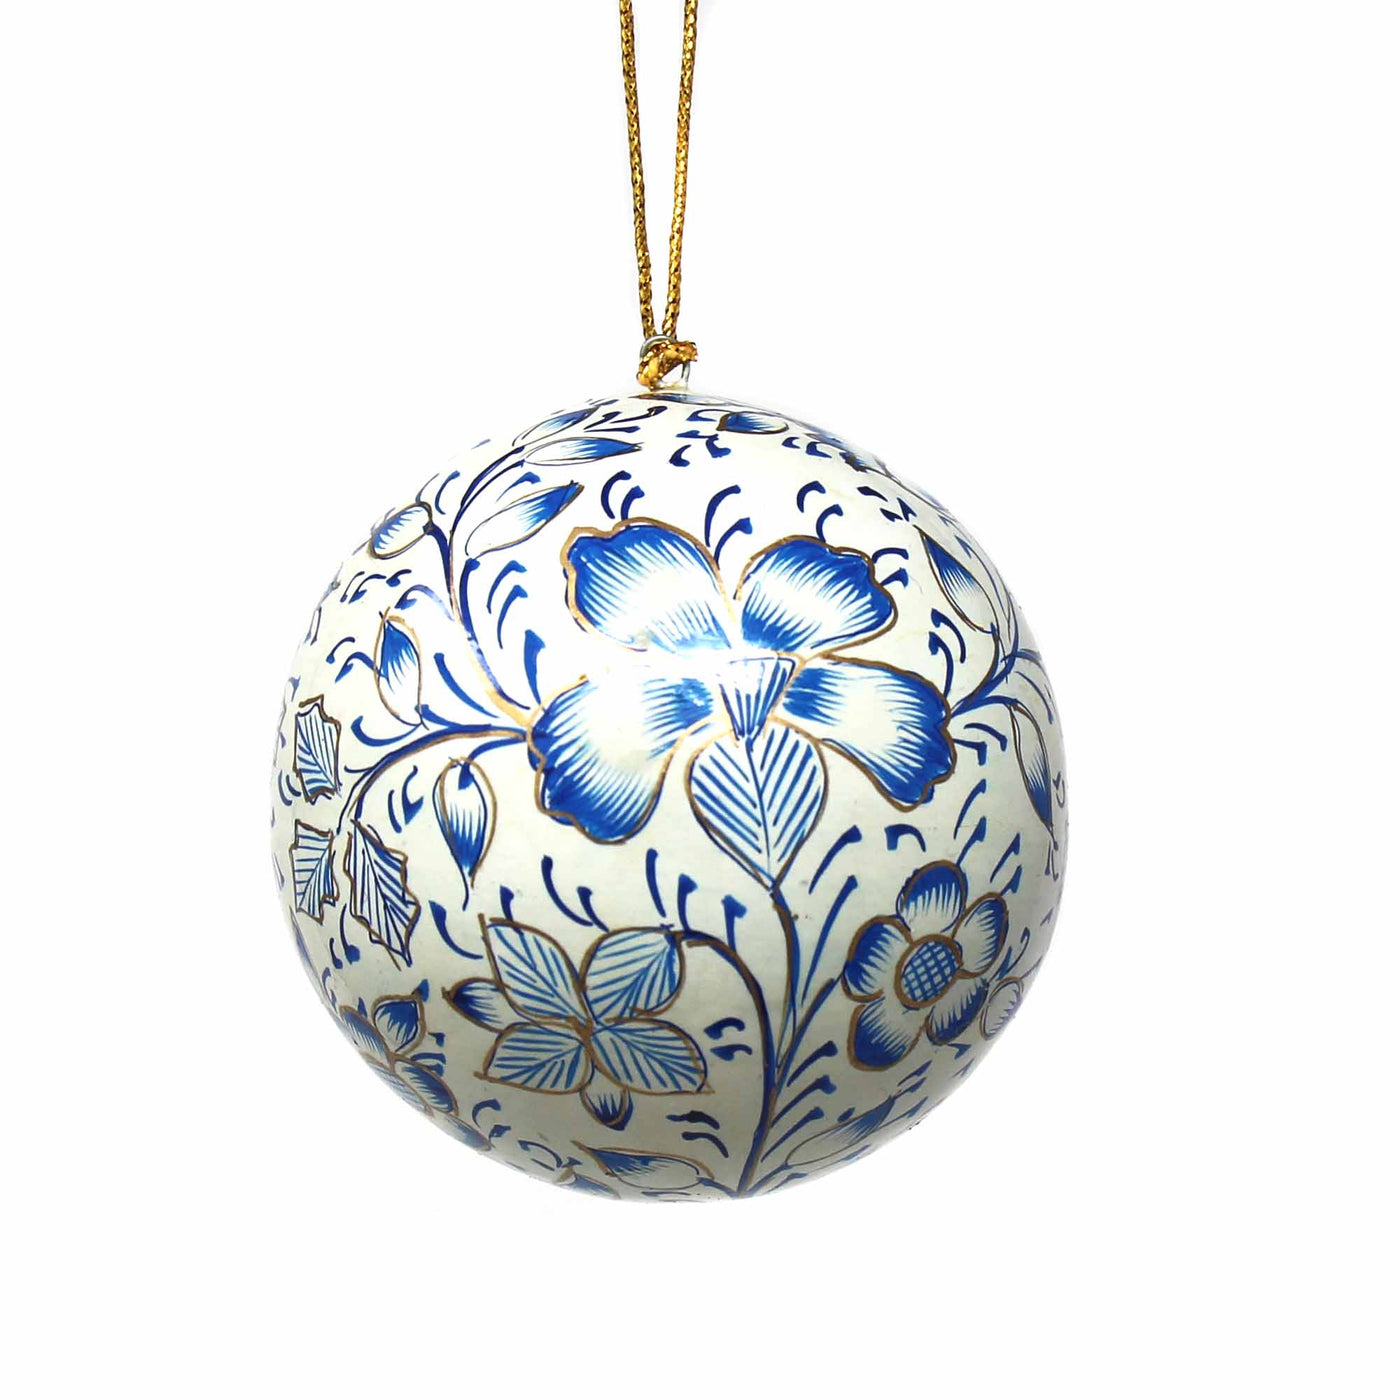 Handpainted Ornament Blue Floral - Yvonne’s 100th Wish Inc